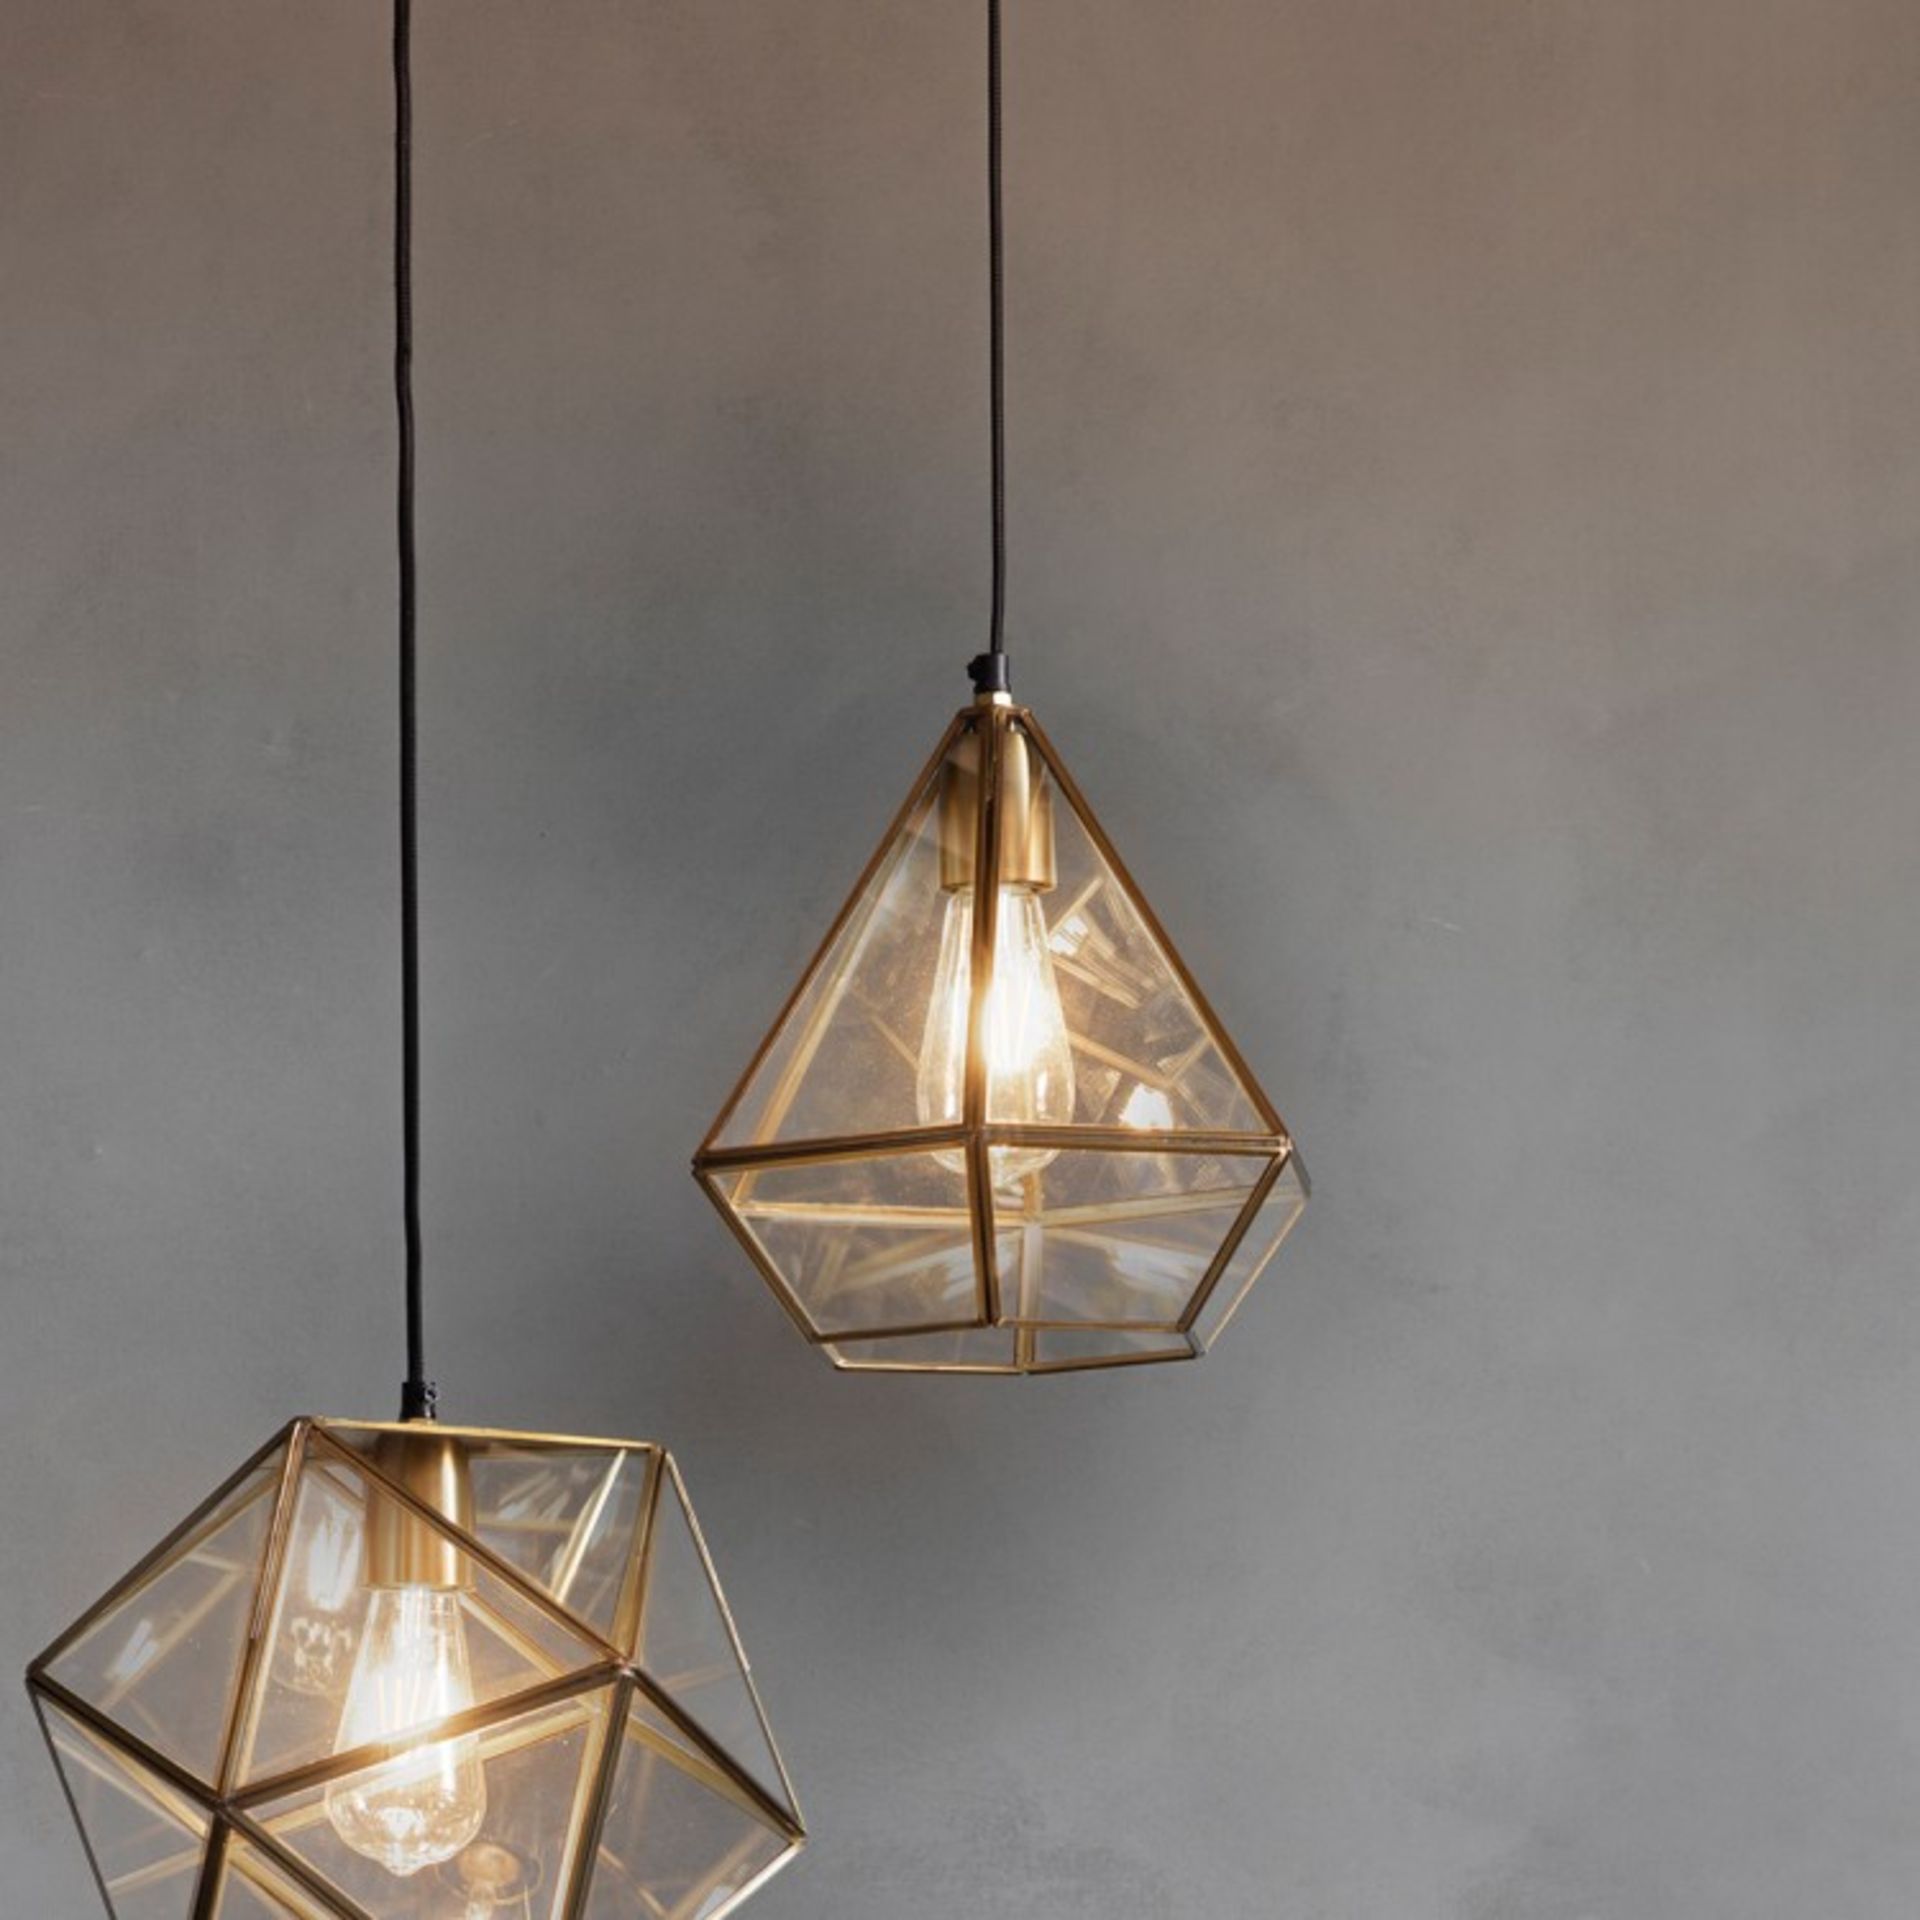 Piceno Pendant Lamp A diamond style, this Piceno pendant lamp will brighten up any room.Steel /